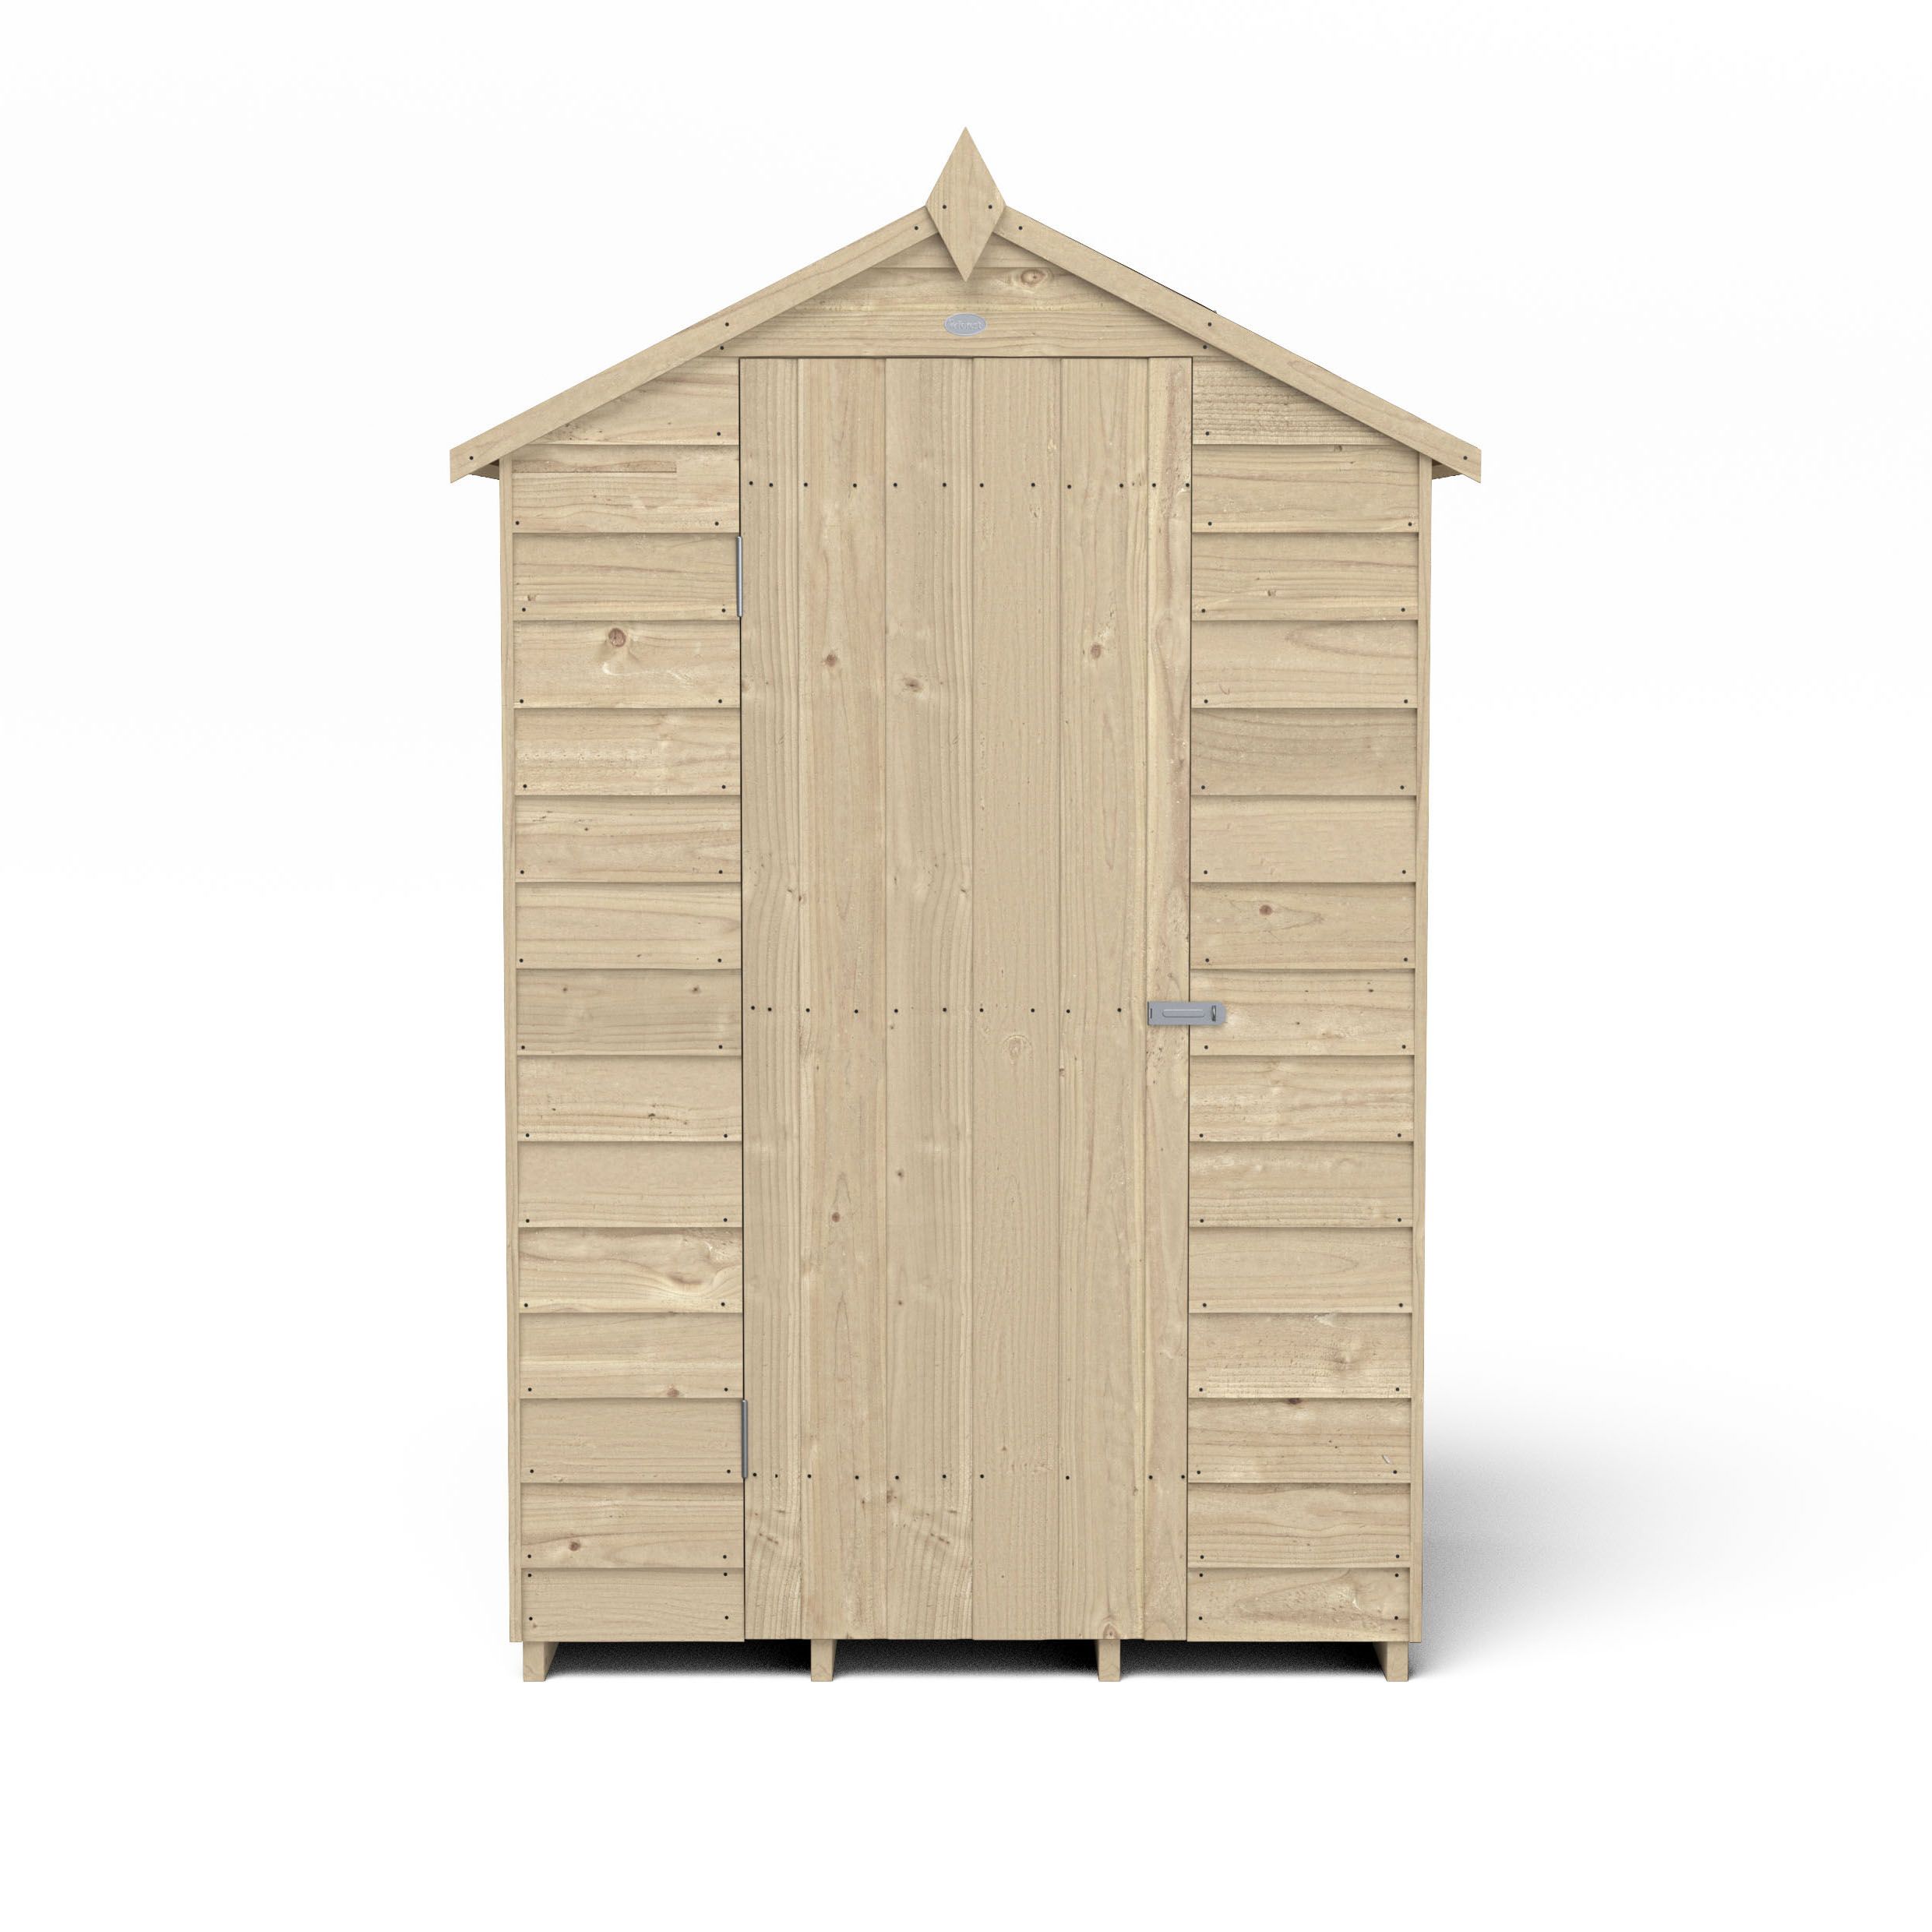 Forest Garden Overlap 4x3 ft Apex Wooden Pressure treated Shed with floor